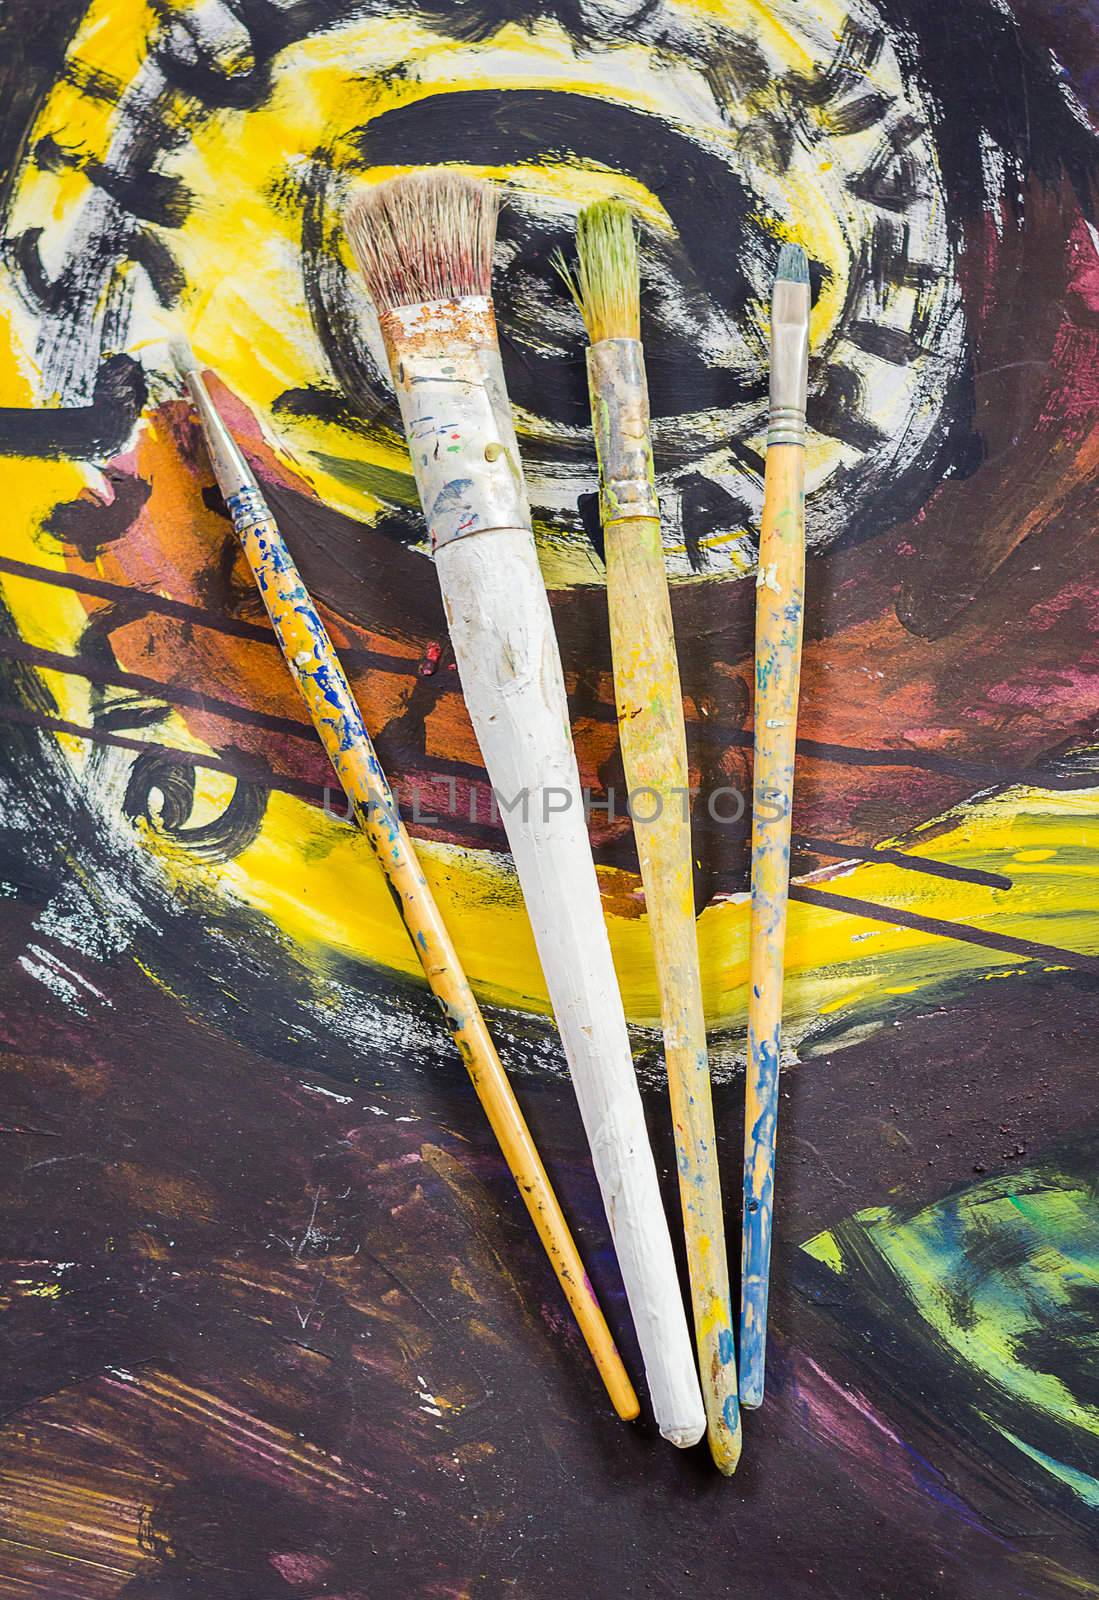 Set of paint brushes on jar, on oil painting